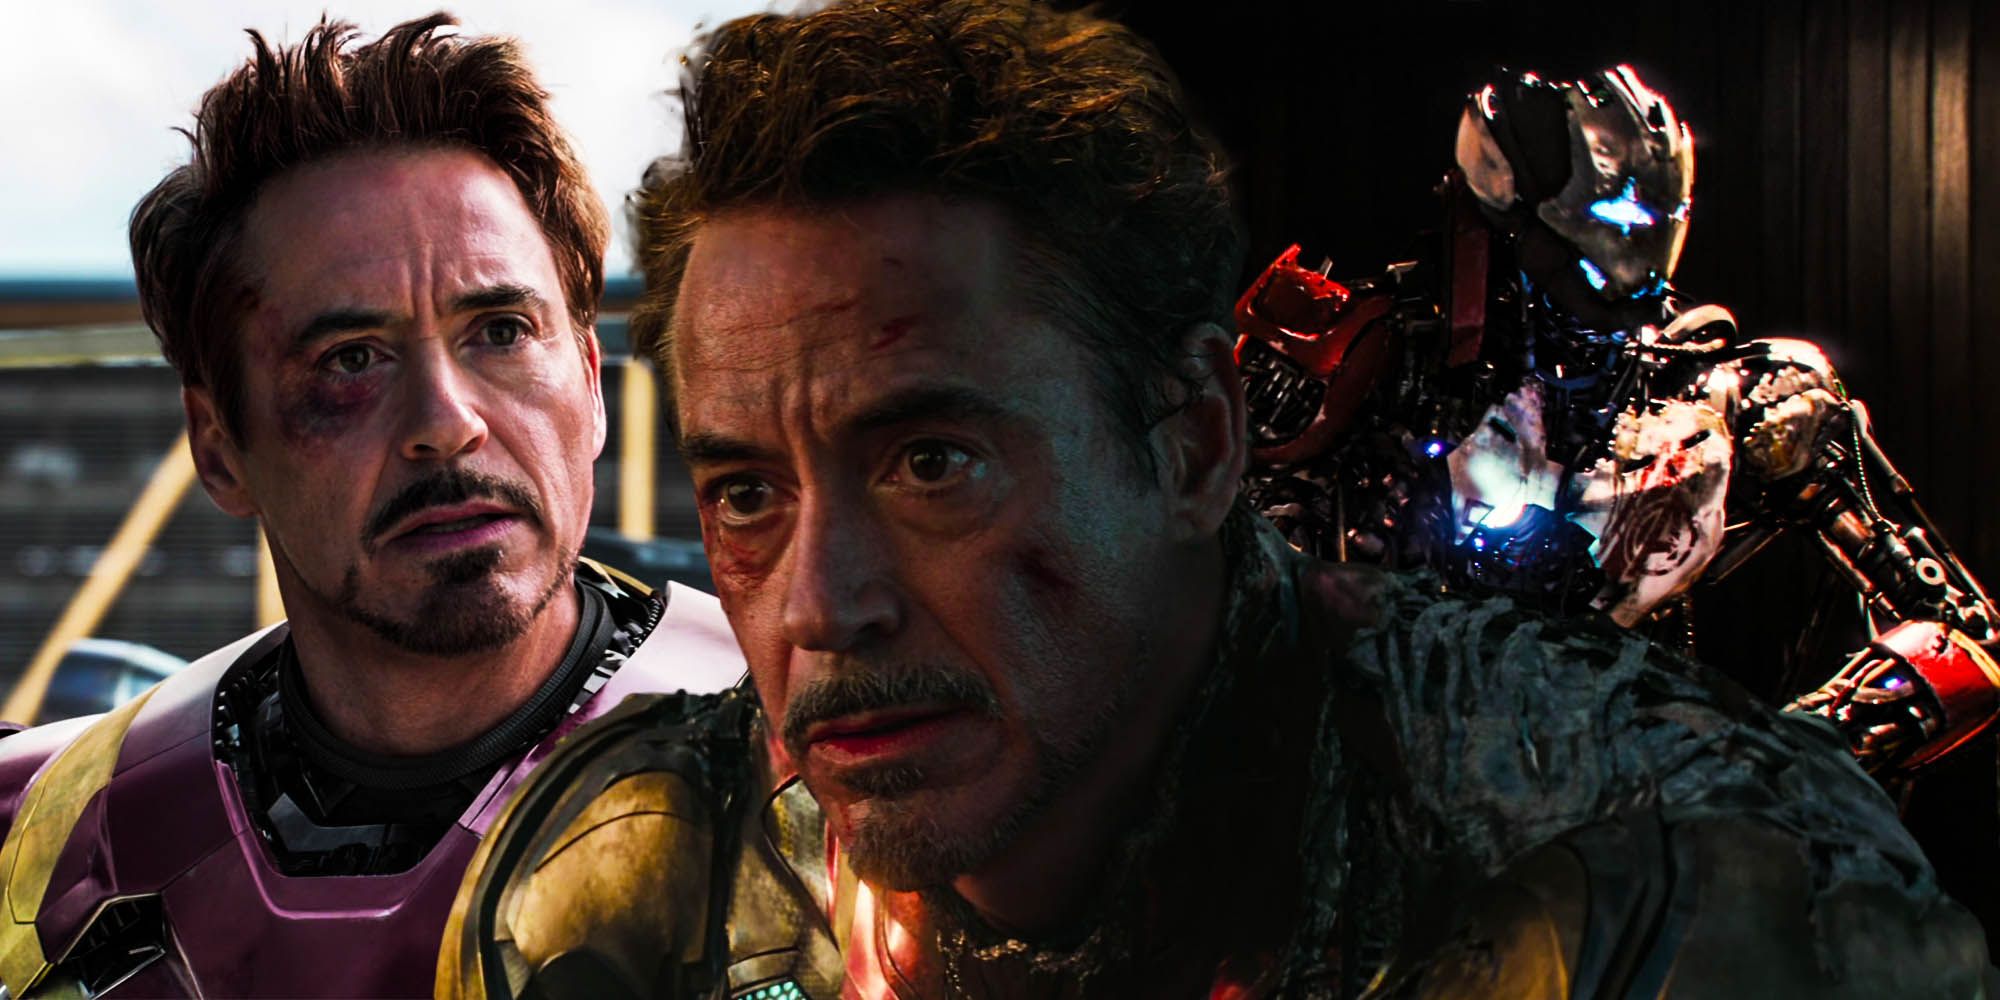 How Old is Tony Stark in the MCU?